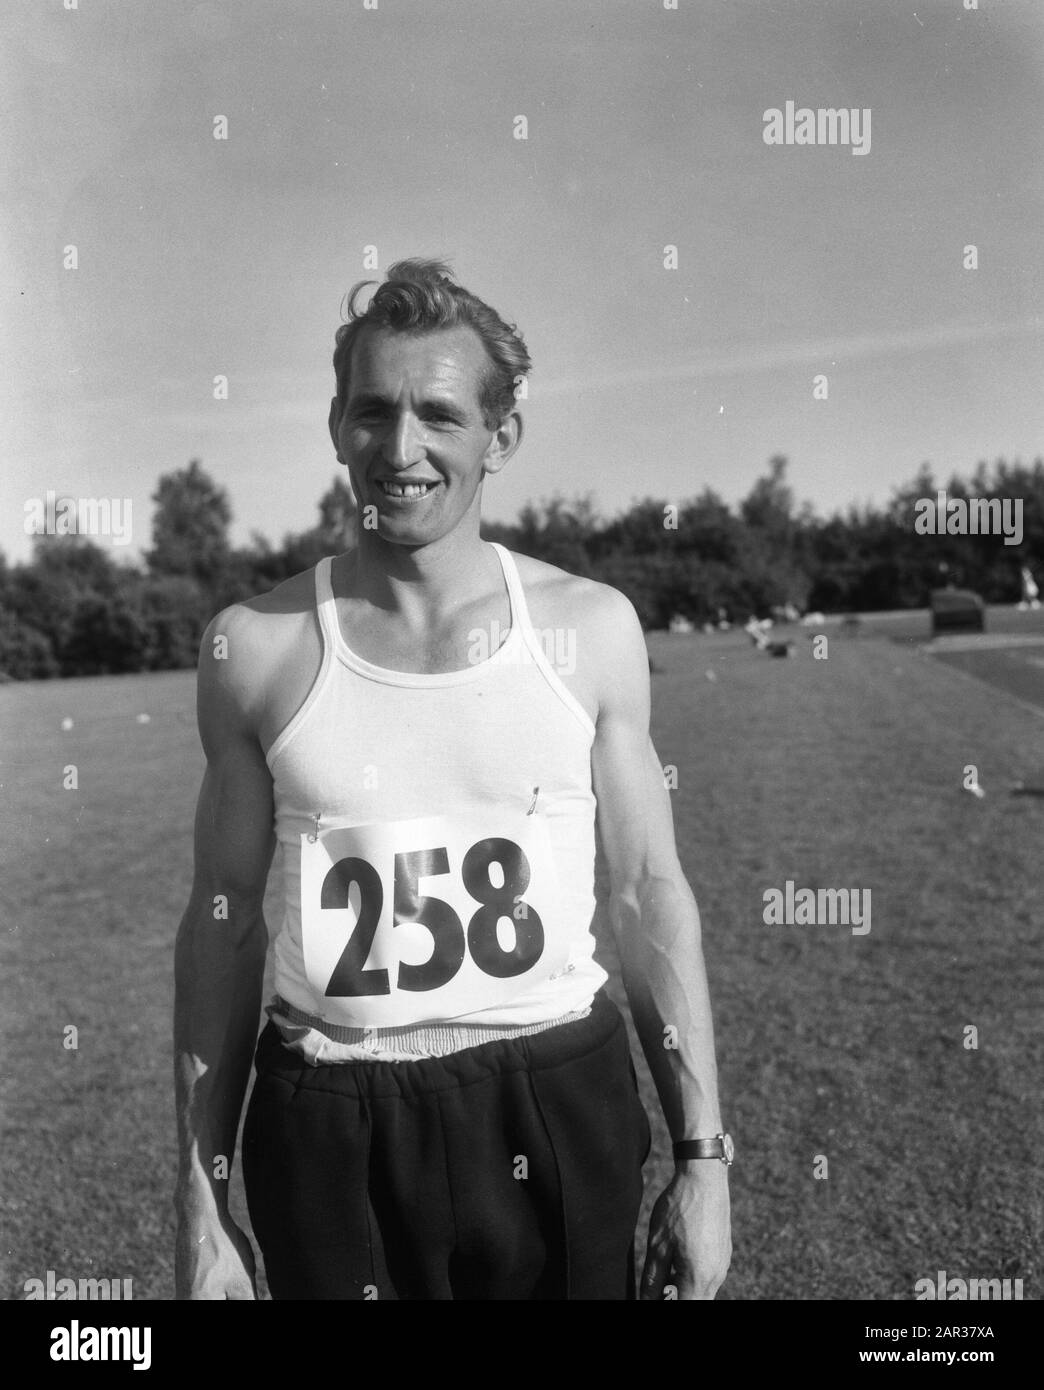 Dutch athletics championships in Groningen, A. Adams champion jumping Date: August 14, 1965 Location: Groningen Keywords: athletics, champion, championships Personal name : A. Adams Stock Photo